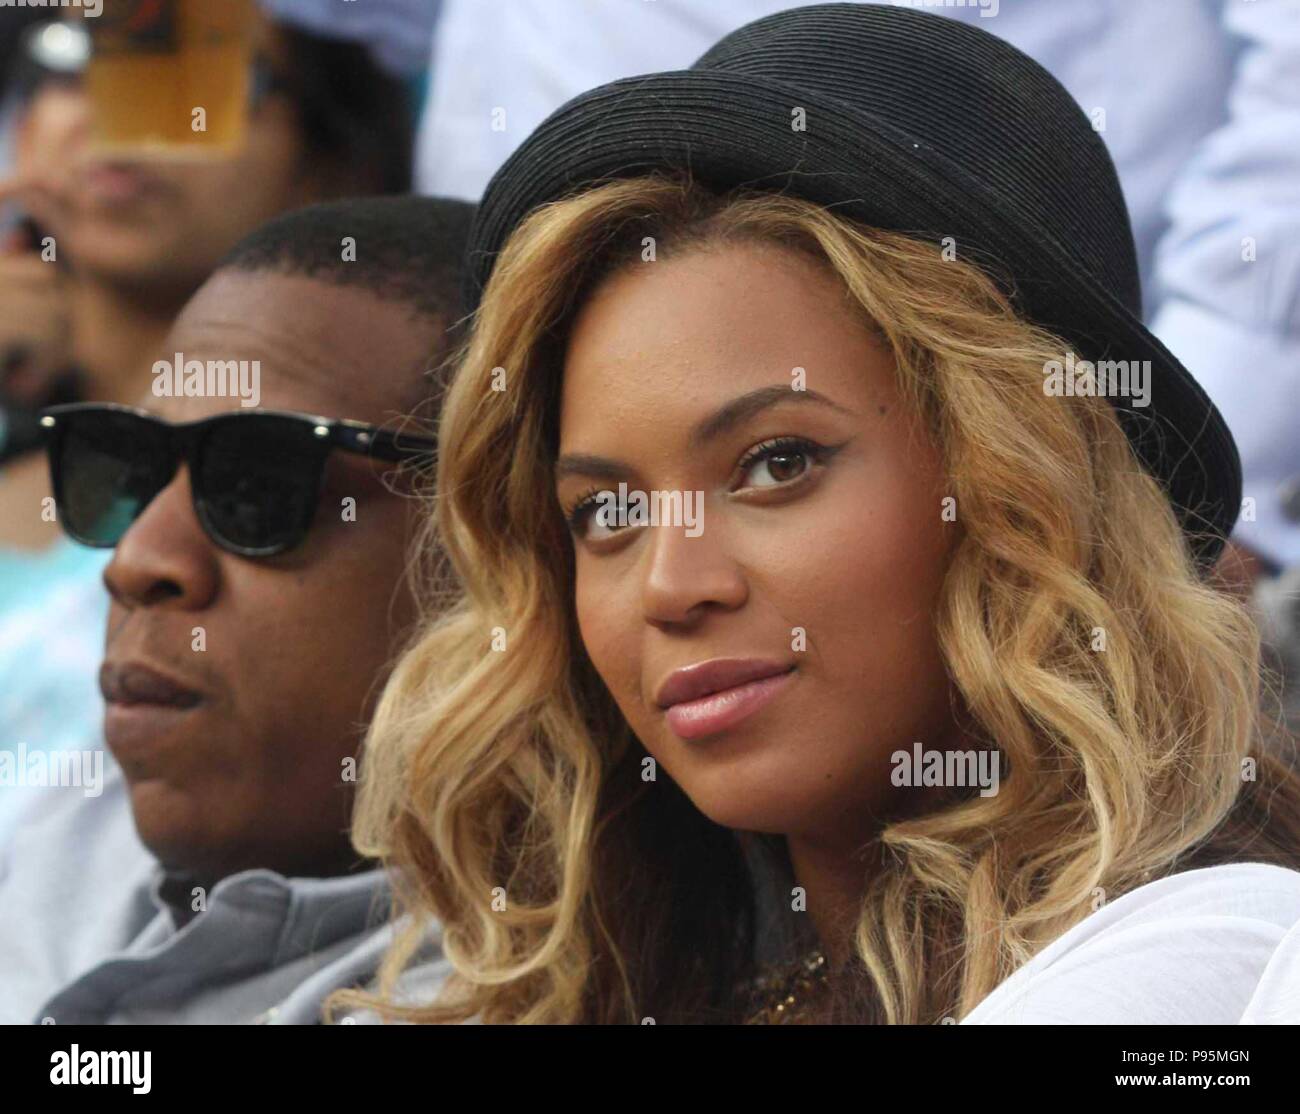 Beyonce Jay Z At Mens Final At Us Open Tennis In Queens 9 12 2011 Photo By John Barrett 